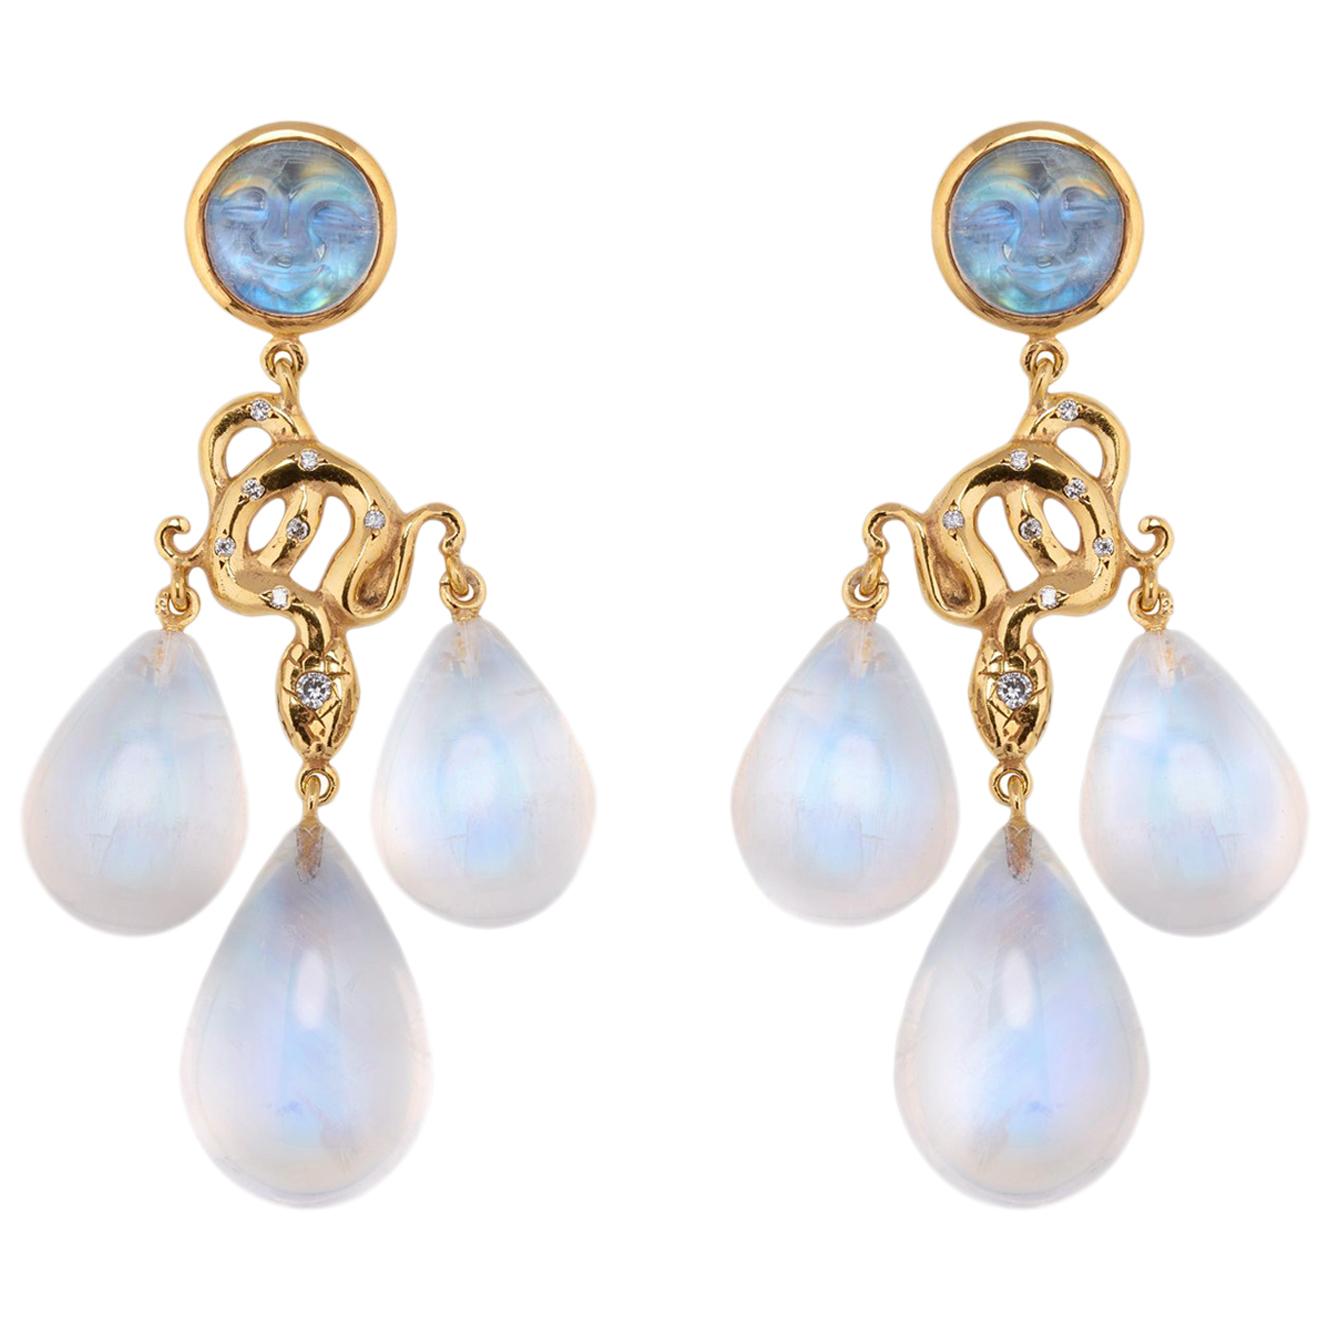 Sylvie Corbelin Moonstone and Diamond Chandelier Earrings in 18K Gold and Silver For Sale